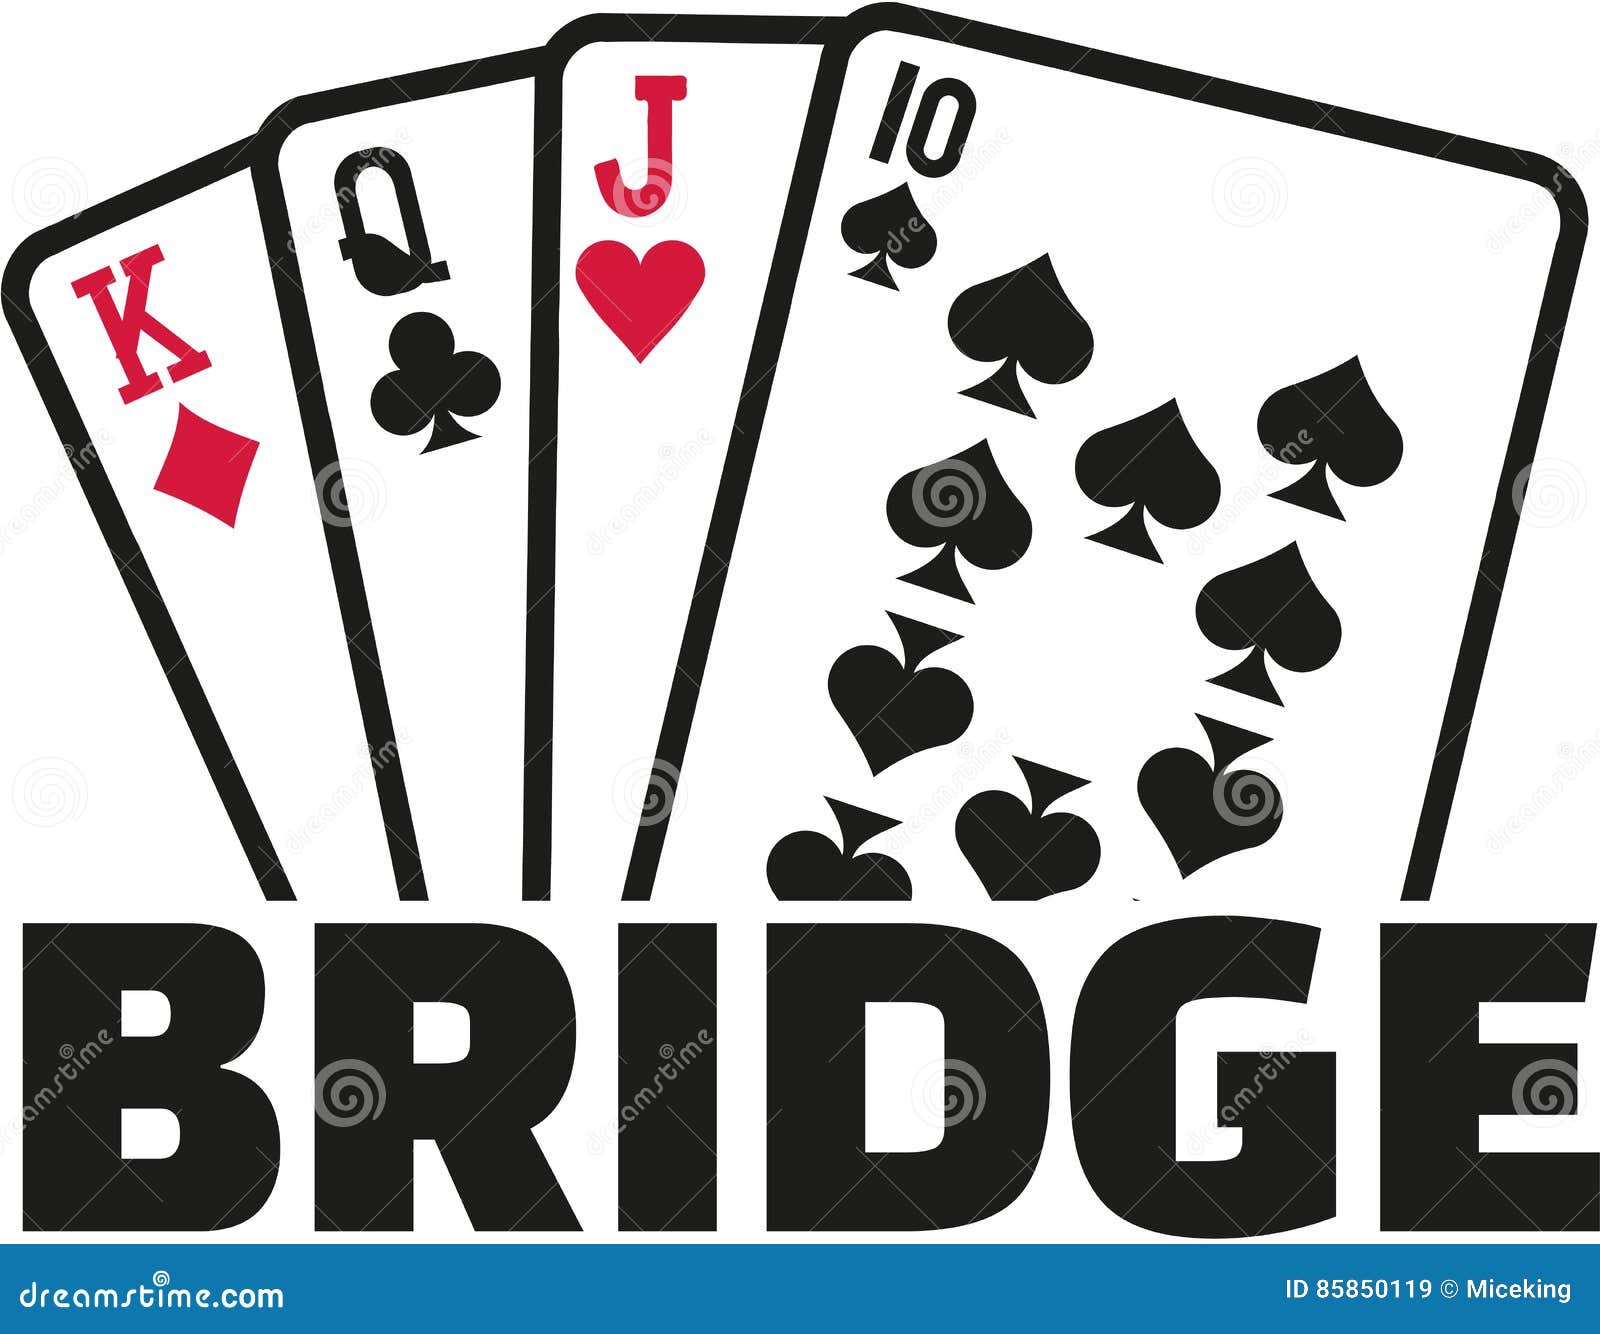 How to Play Bridge Card Game?